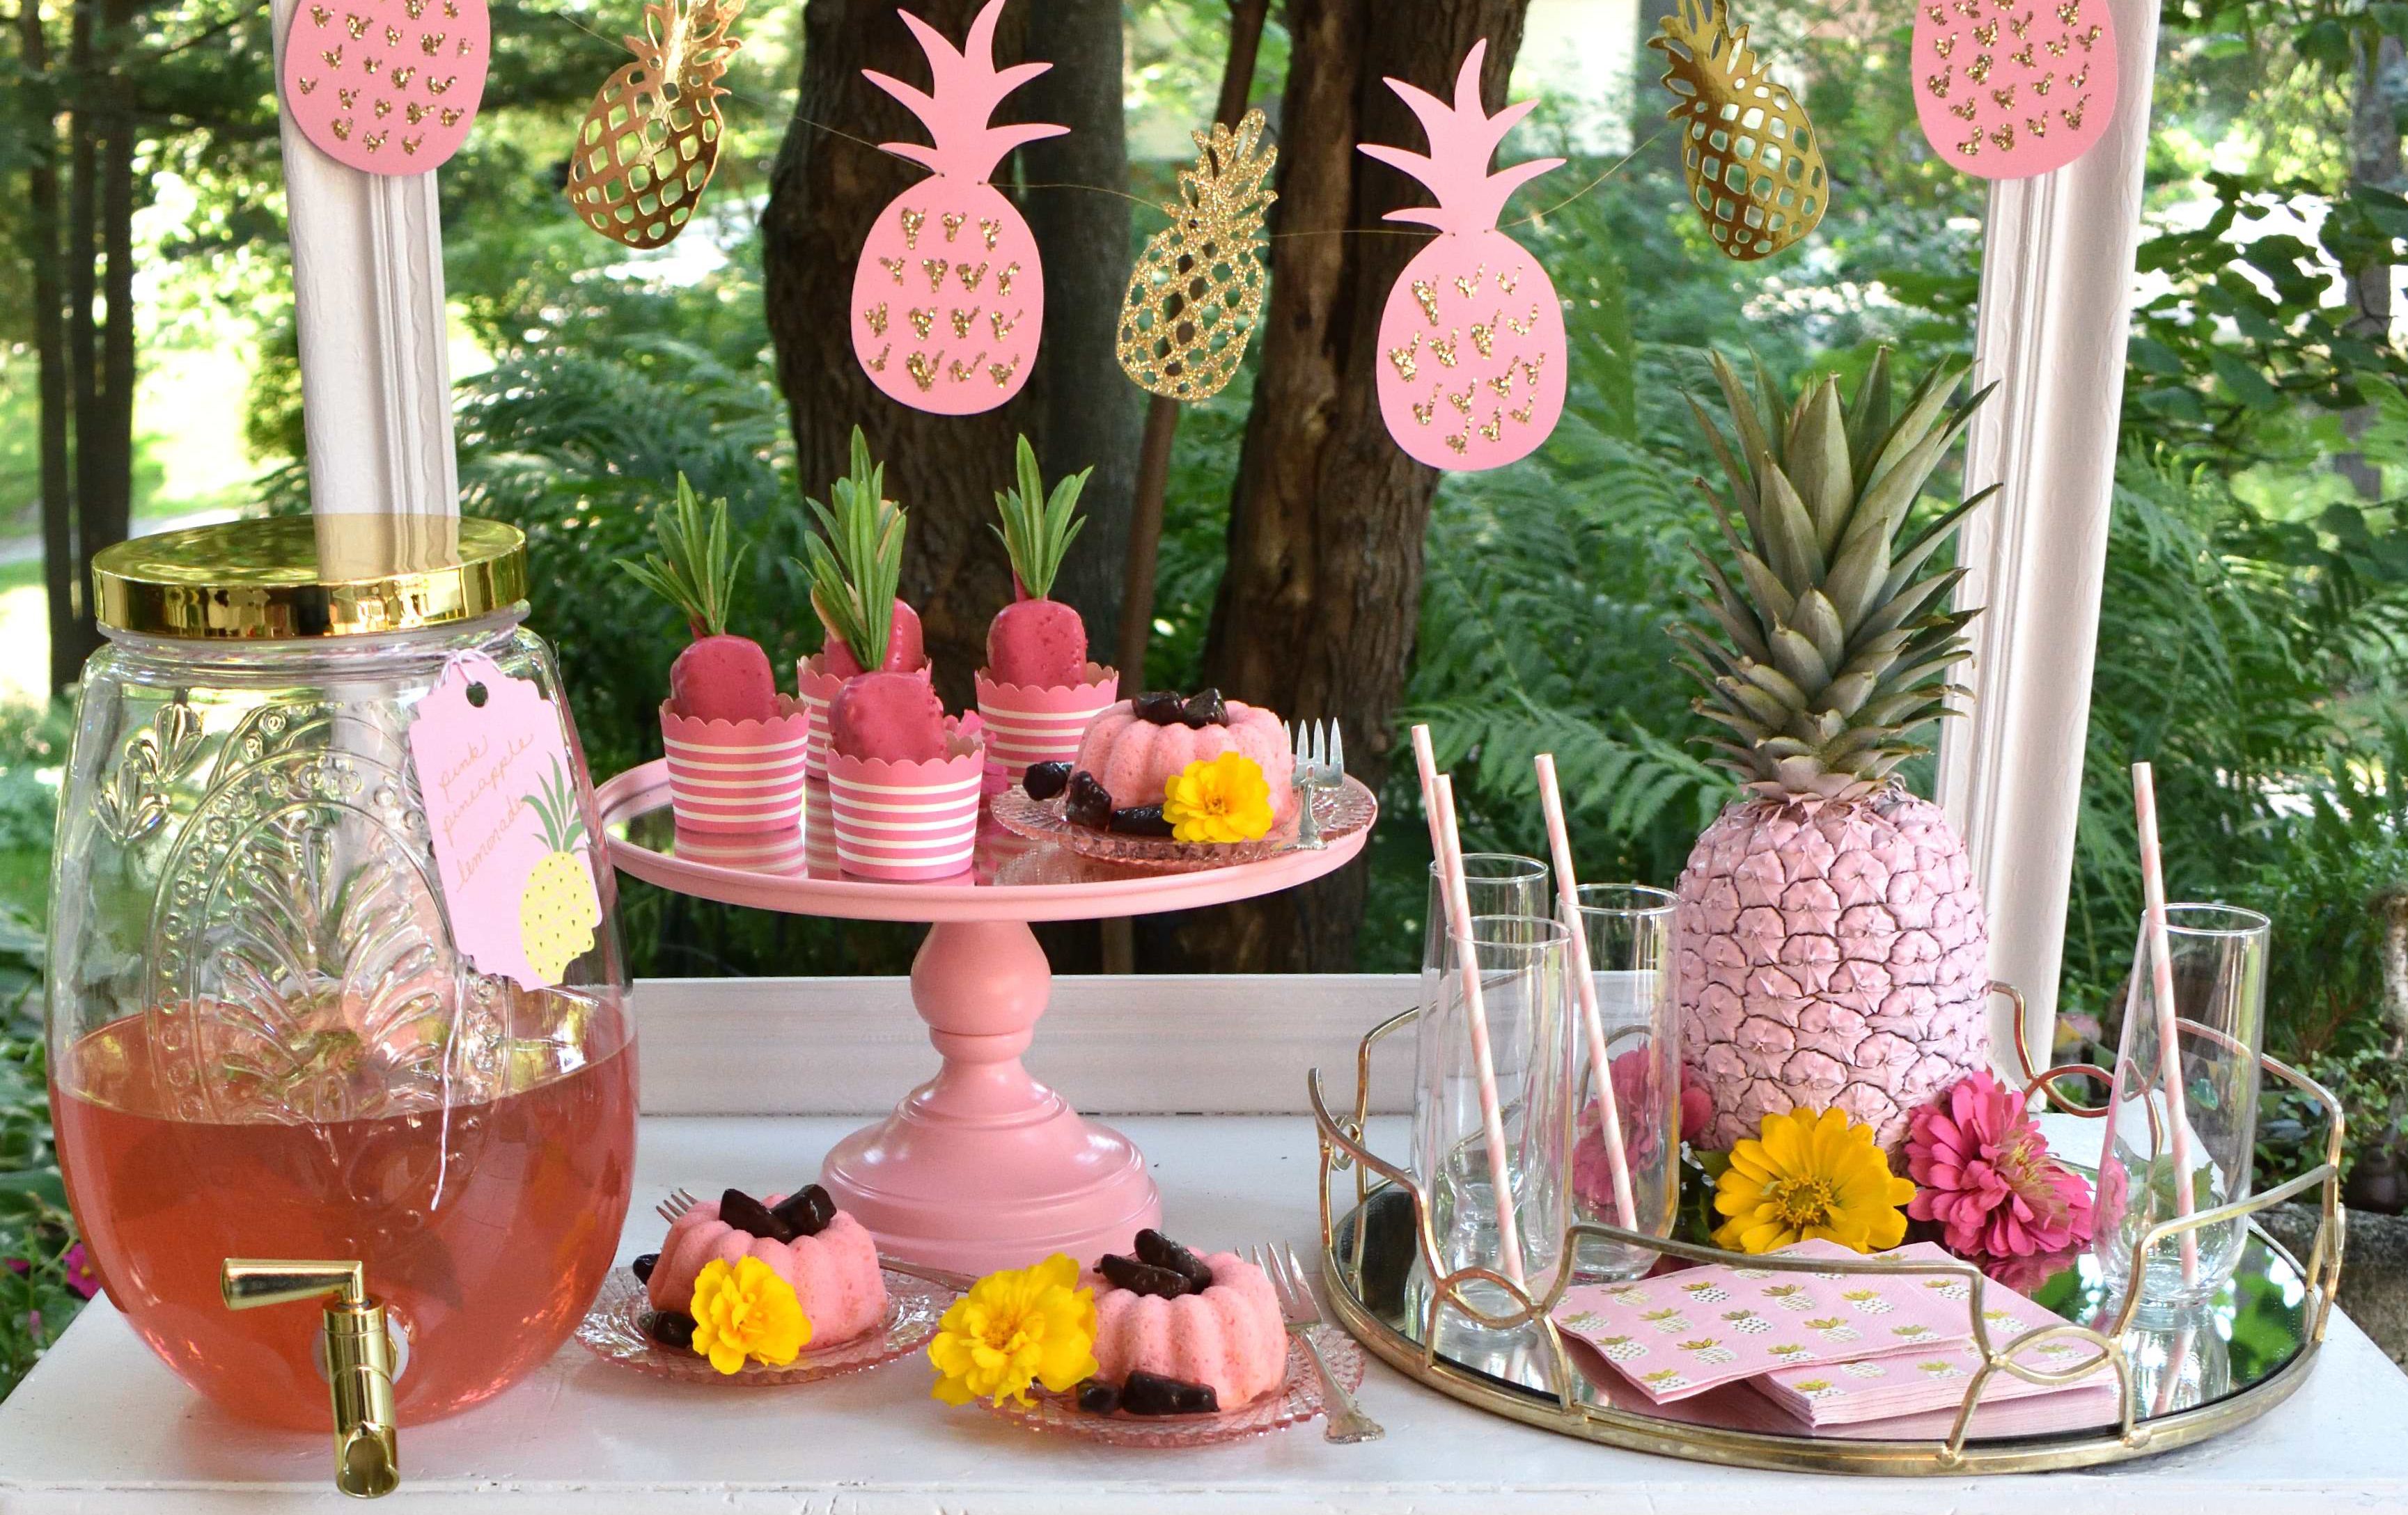 Pineapple party ideas for summer fun! See some festive color options!